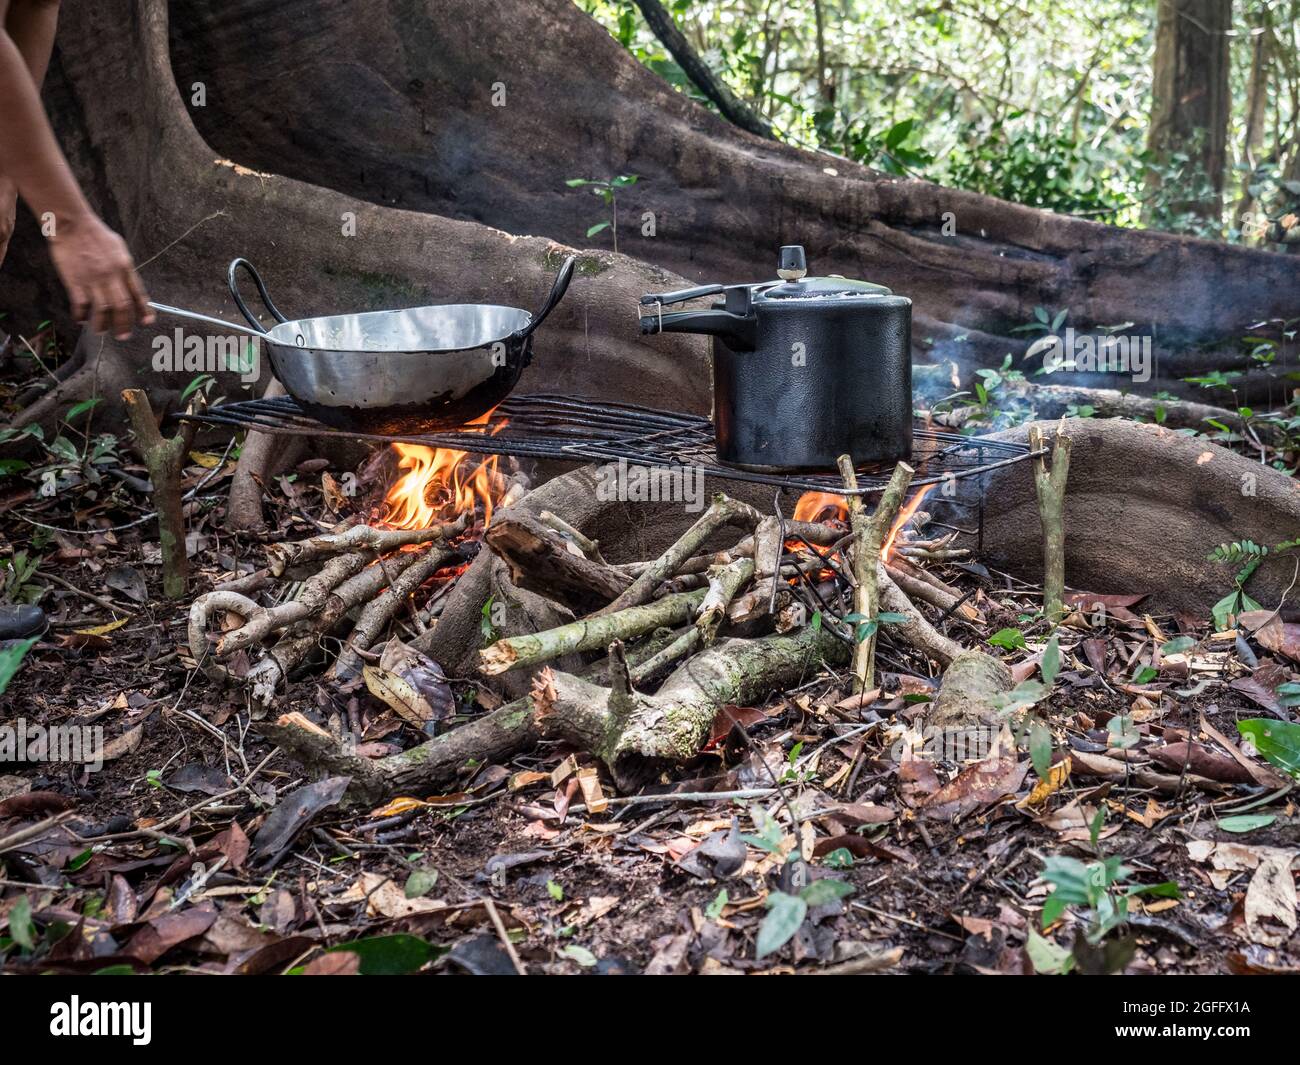 Lagoon, Brazil - November  27, 2017: Cooking on the fireplece on the camp in the amazonas jungle. South America. Amazonia Stock Photo